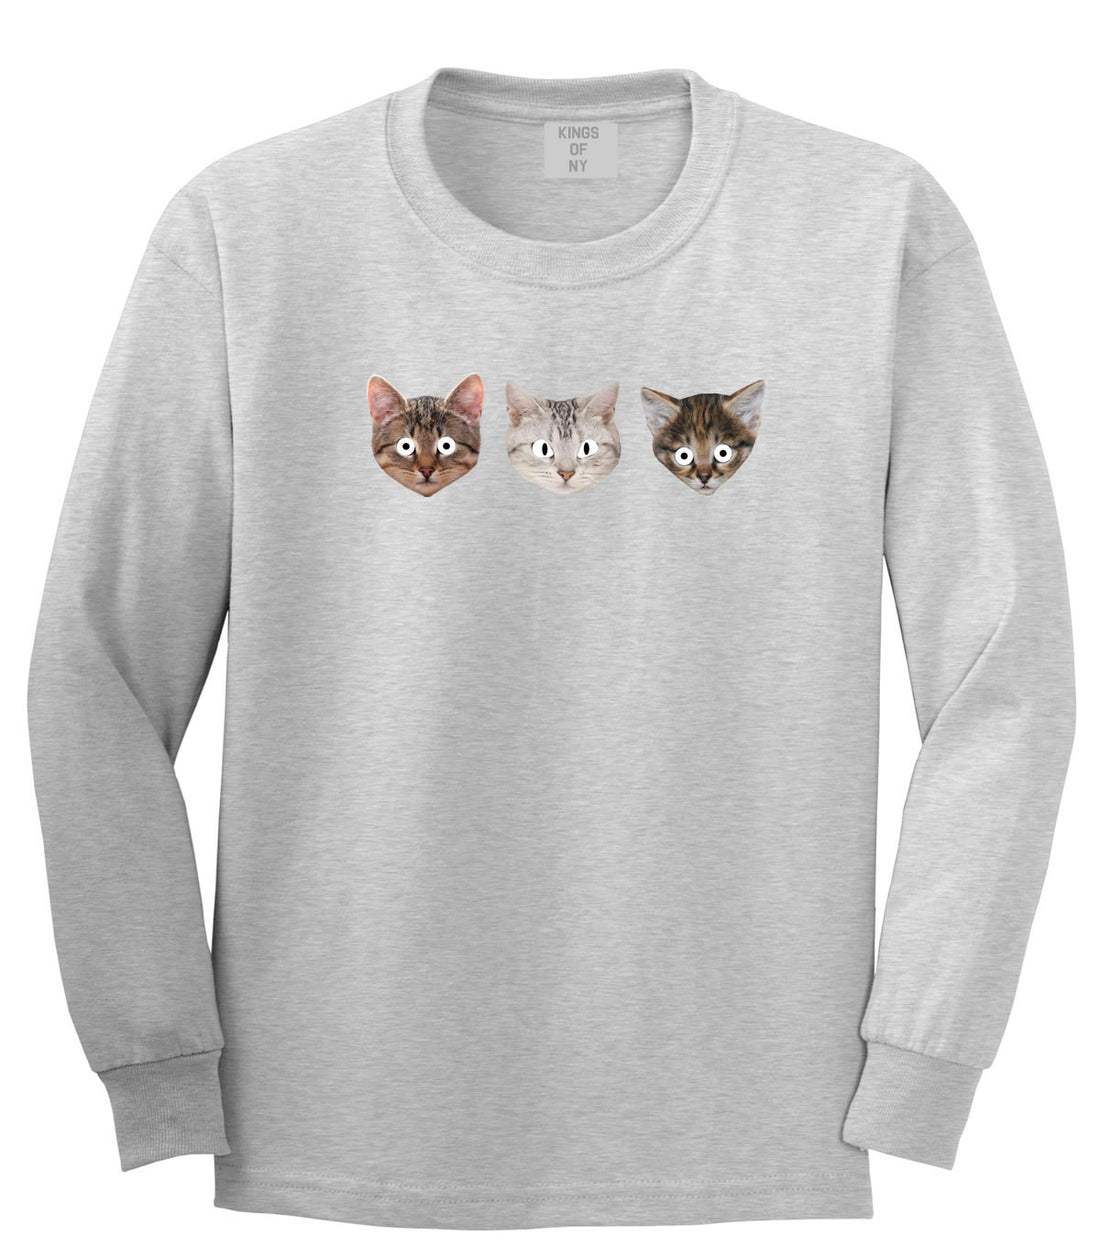 Cats Crazy Kittens Long Sleeve T-Shirt in Grey By Kings Of NY